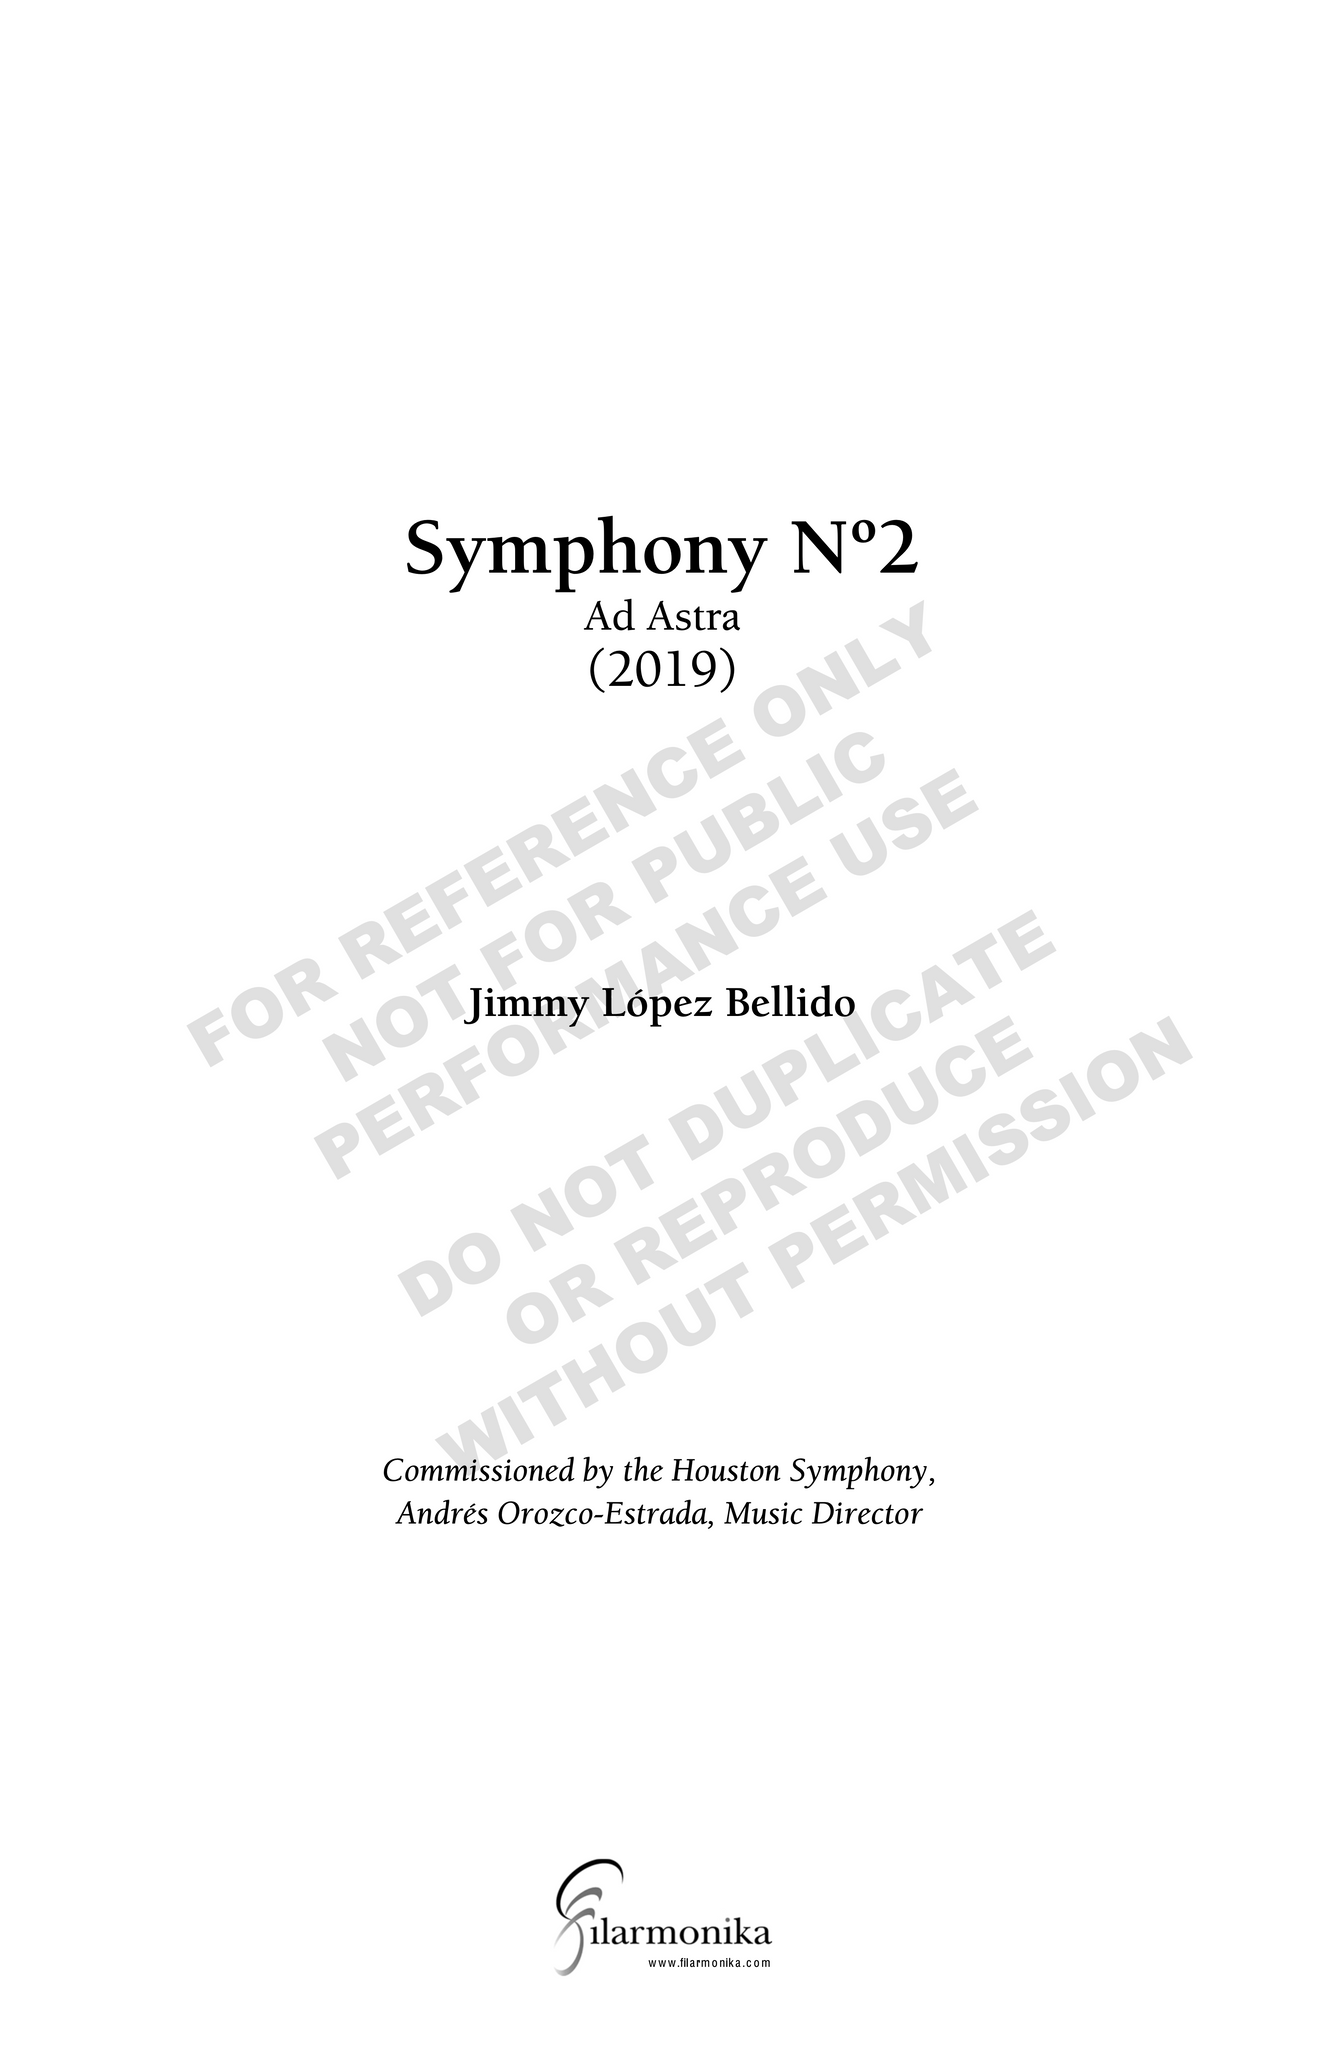 Symphony Nº 2: Ad Astra, for orchestra